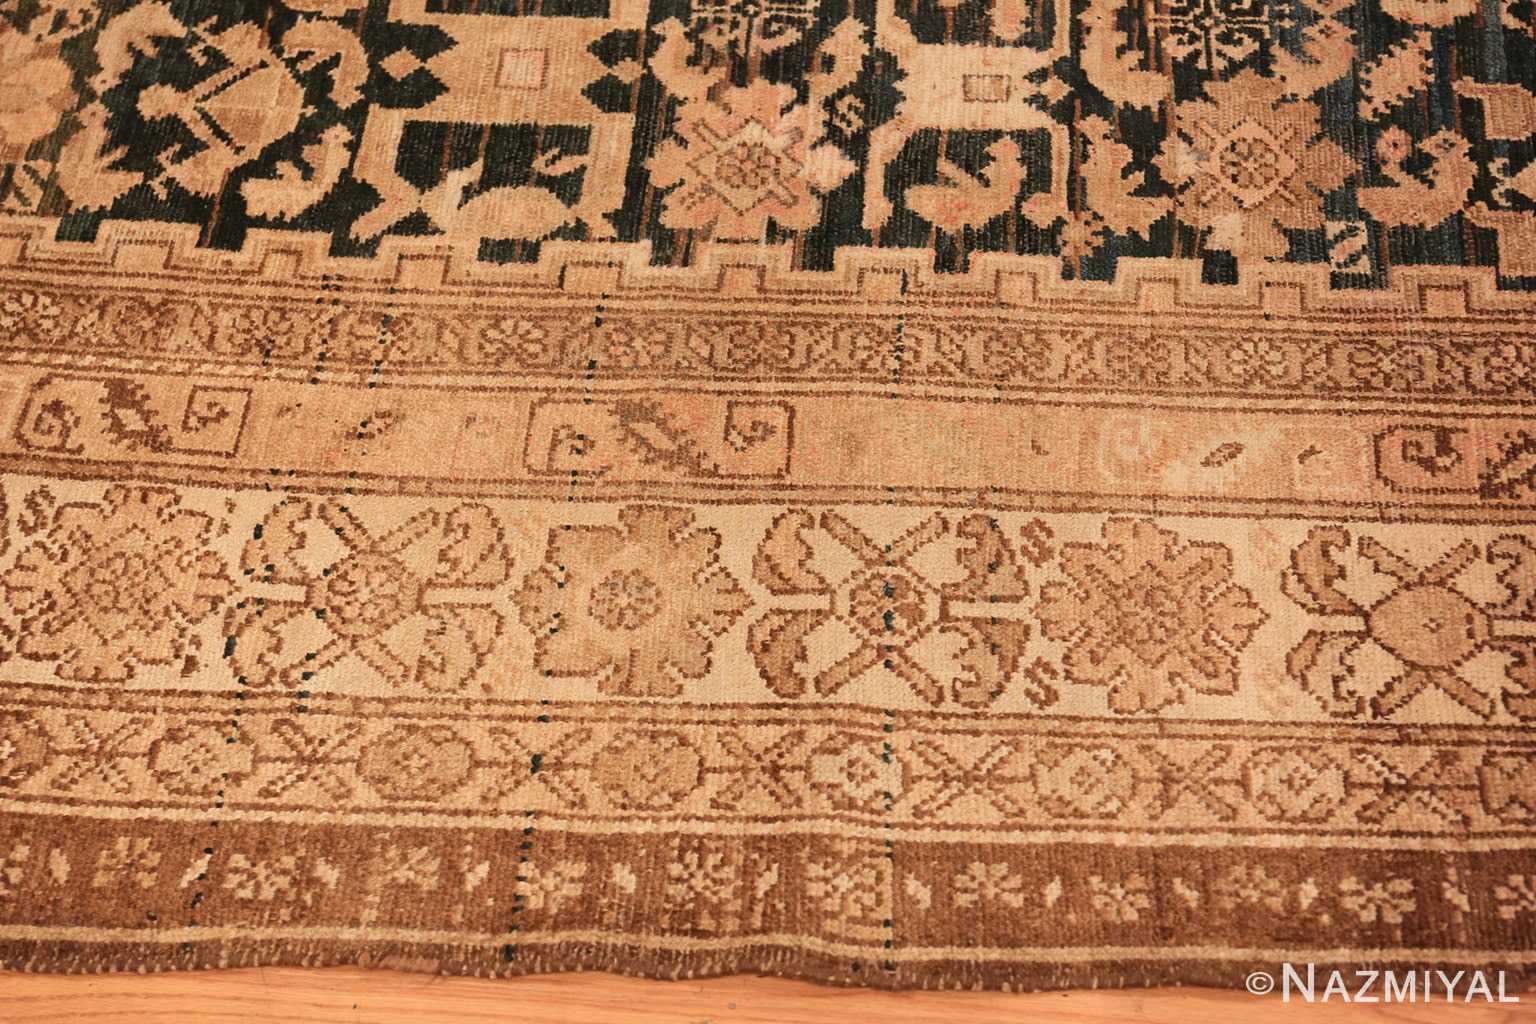 Border Antique gallery size tribal Persian Malayer rug 50469 by Nazmiyal Antique Rugs in NYC